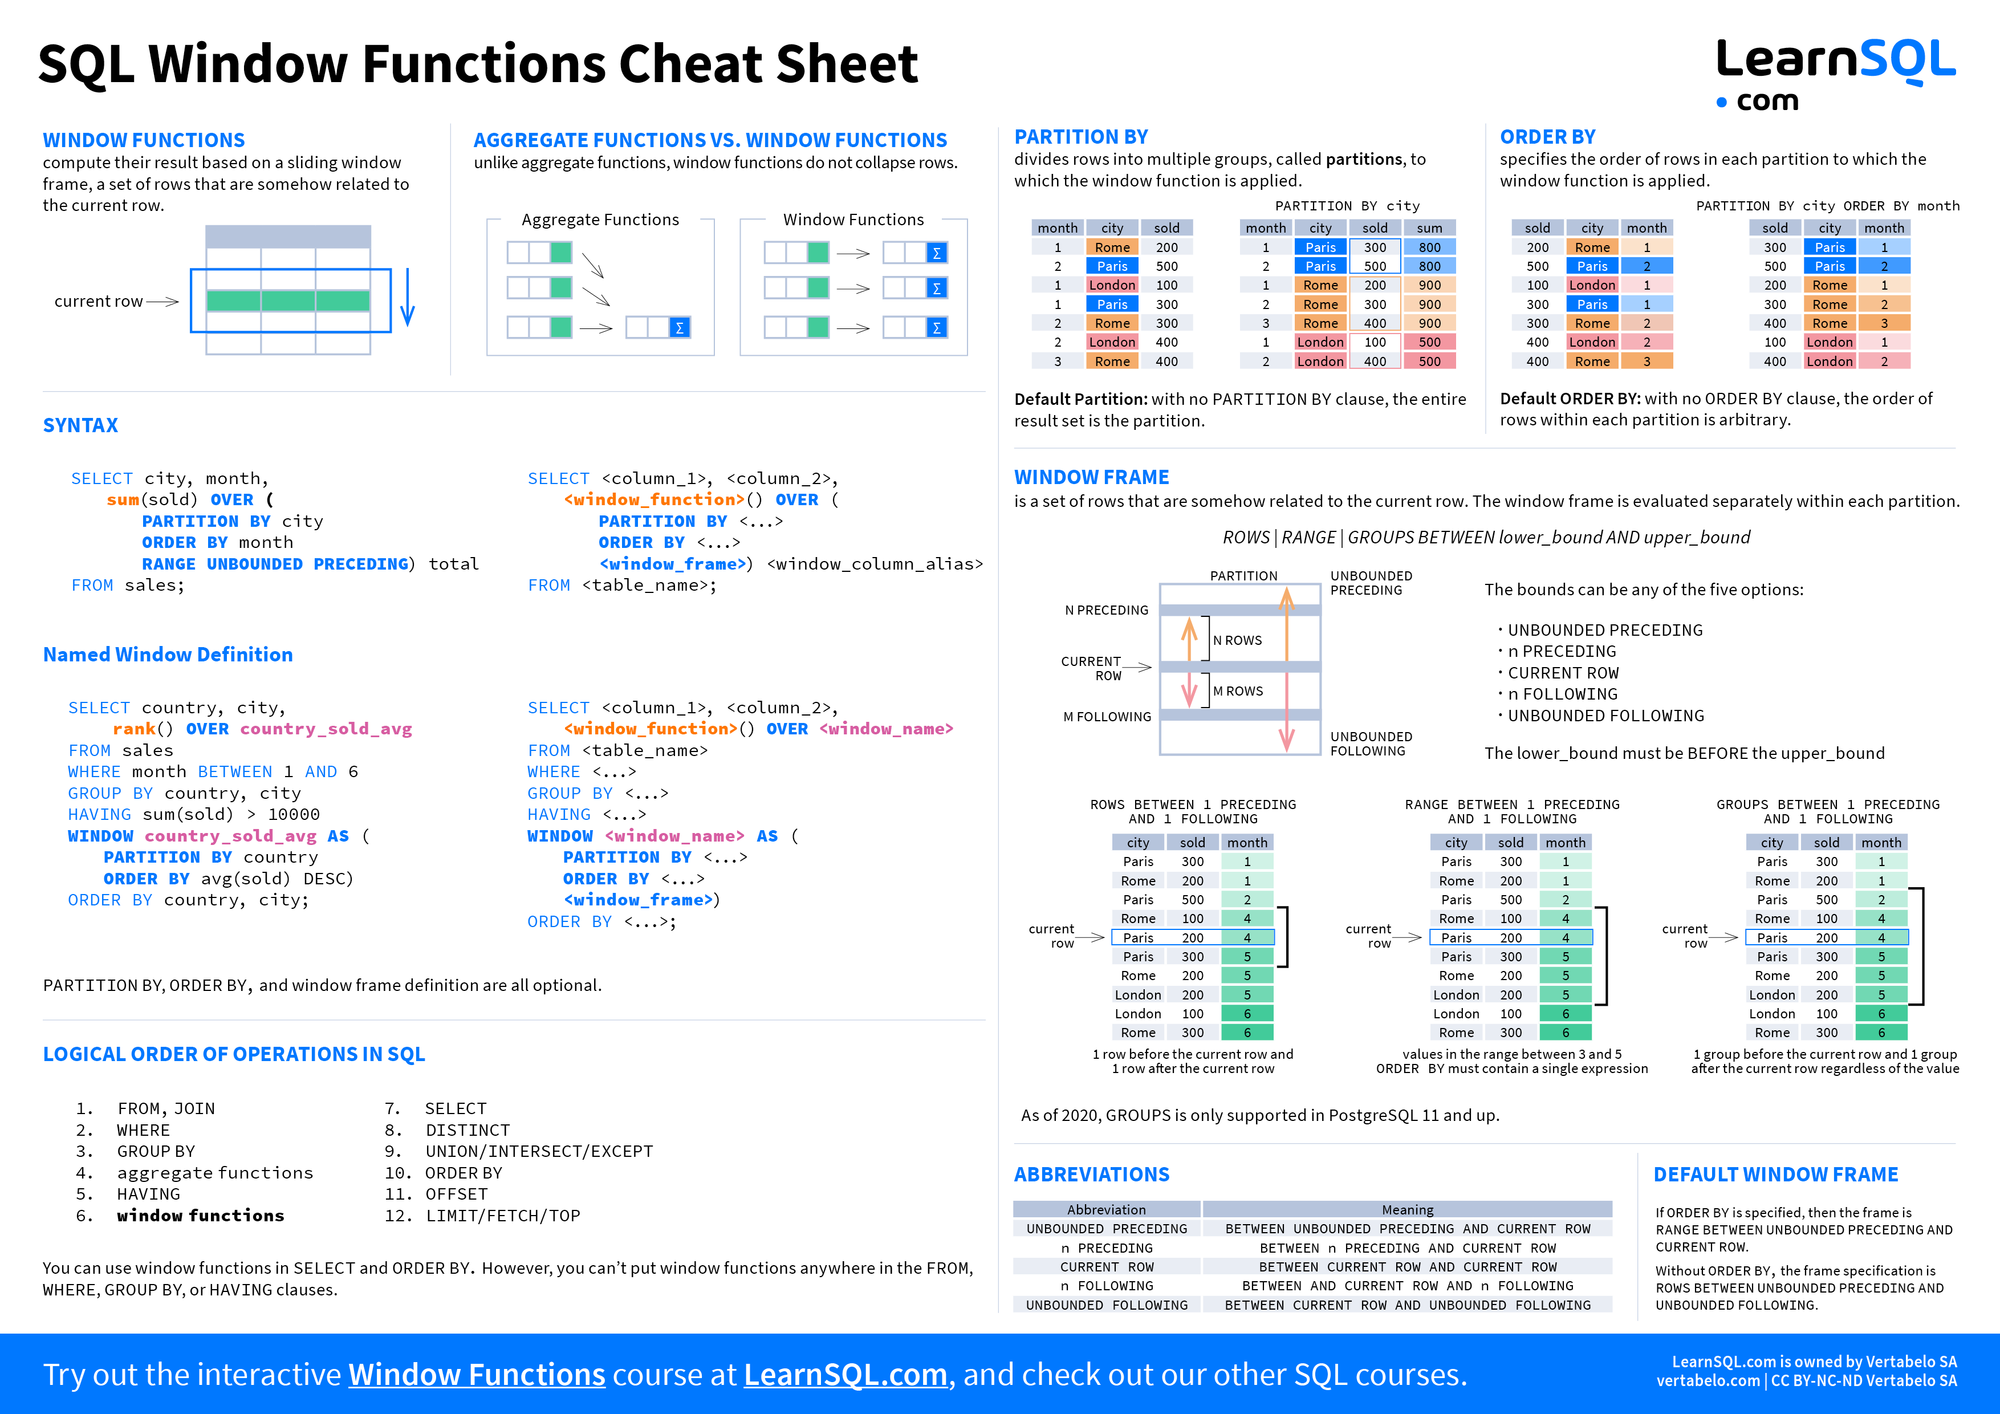 SQL Window Functions Cheat Sheet page 1.